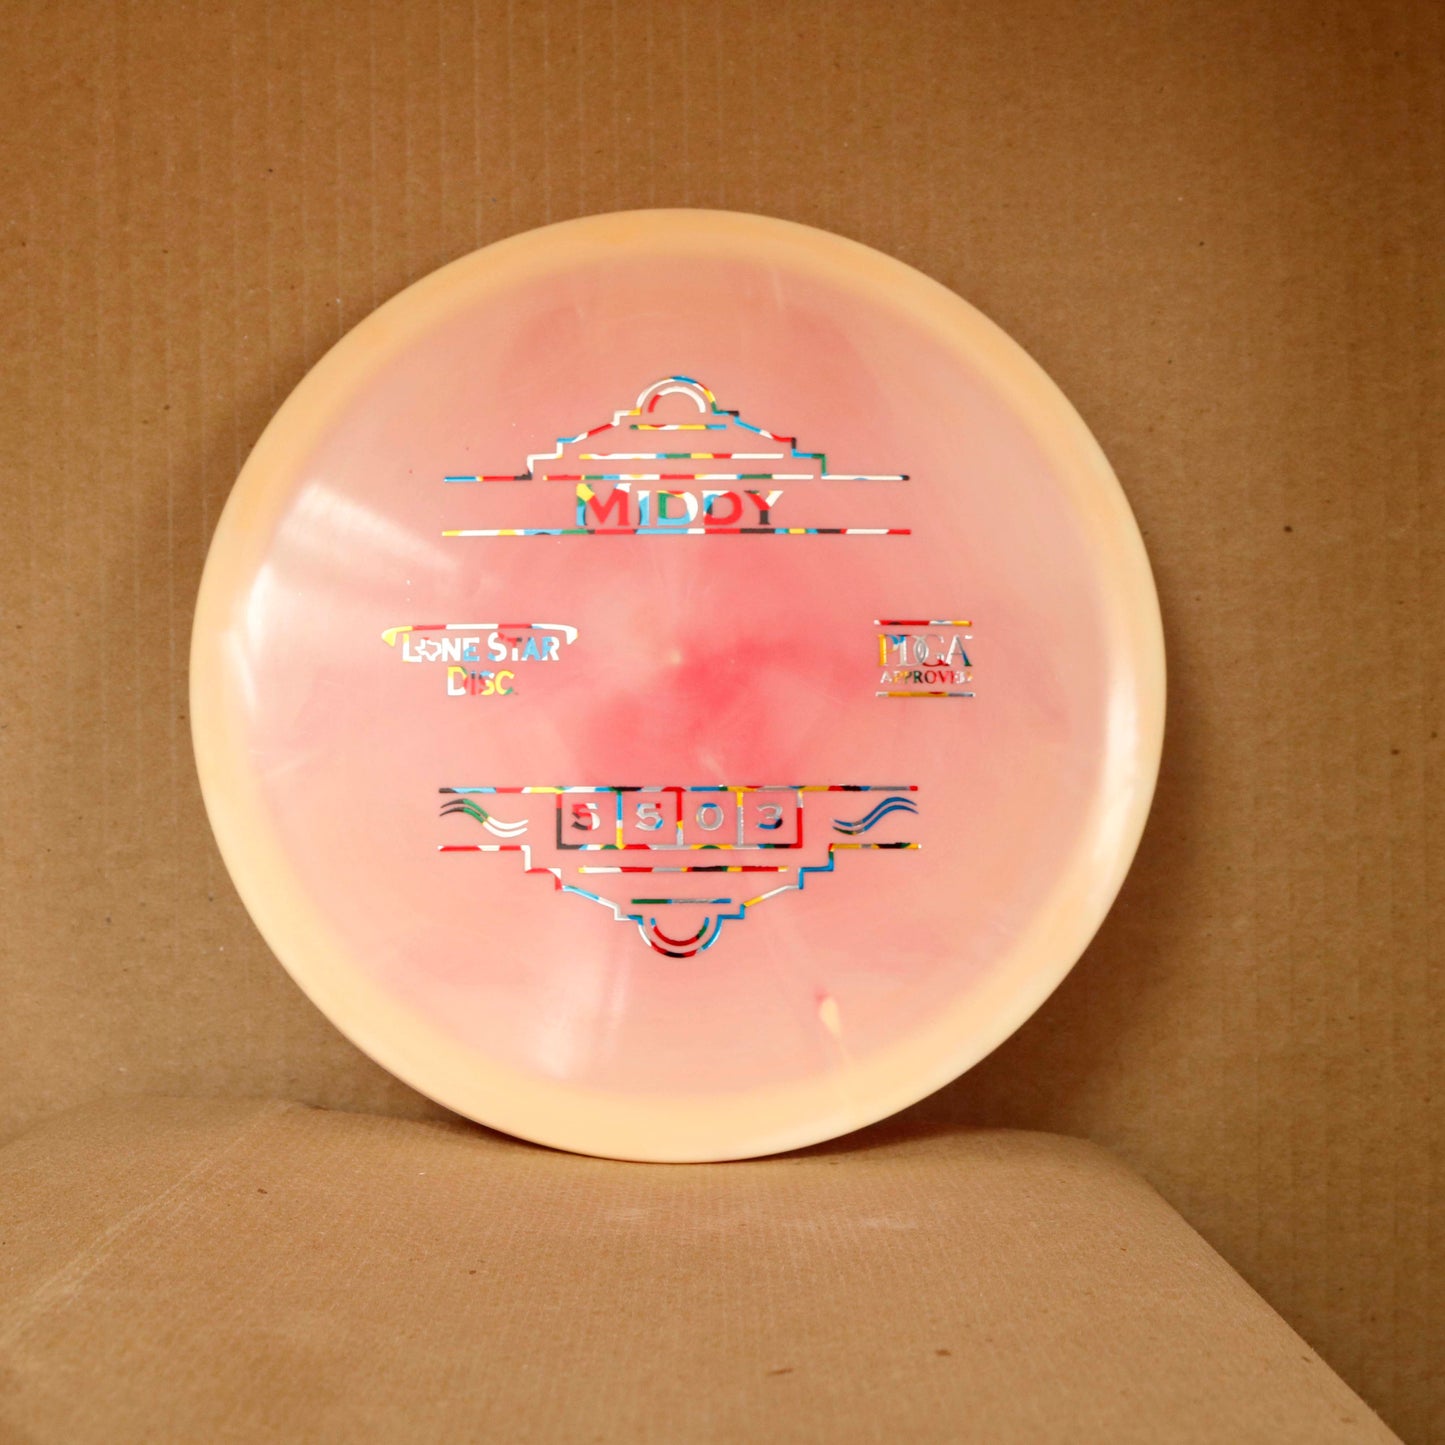 Lone Star Disc Middy